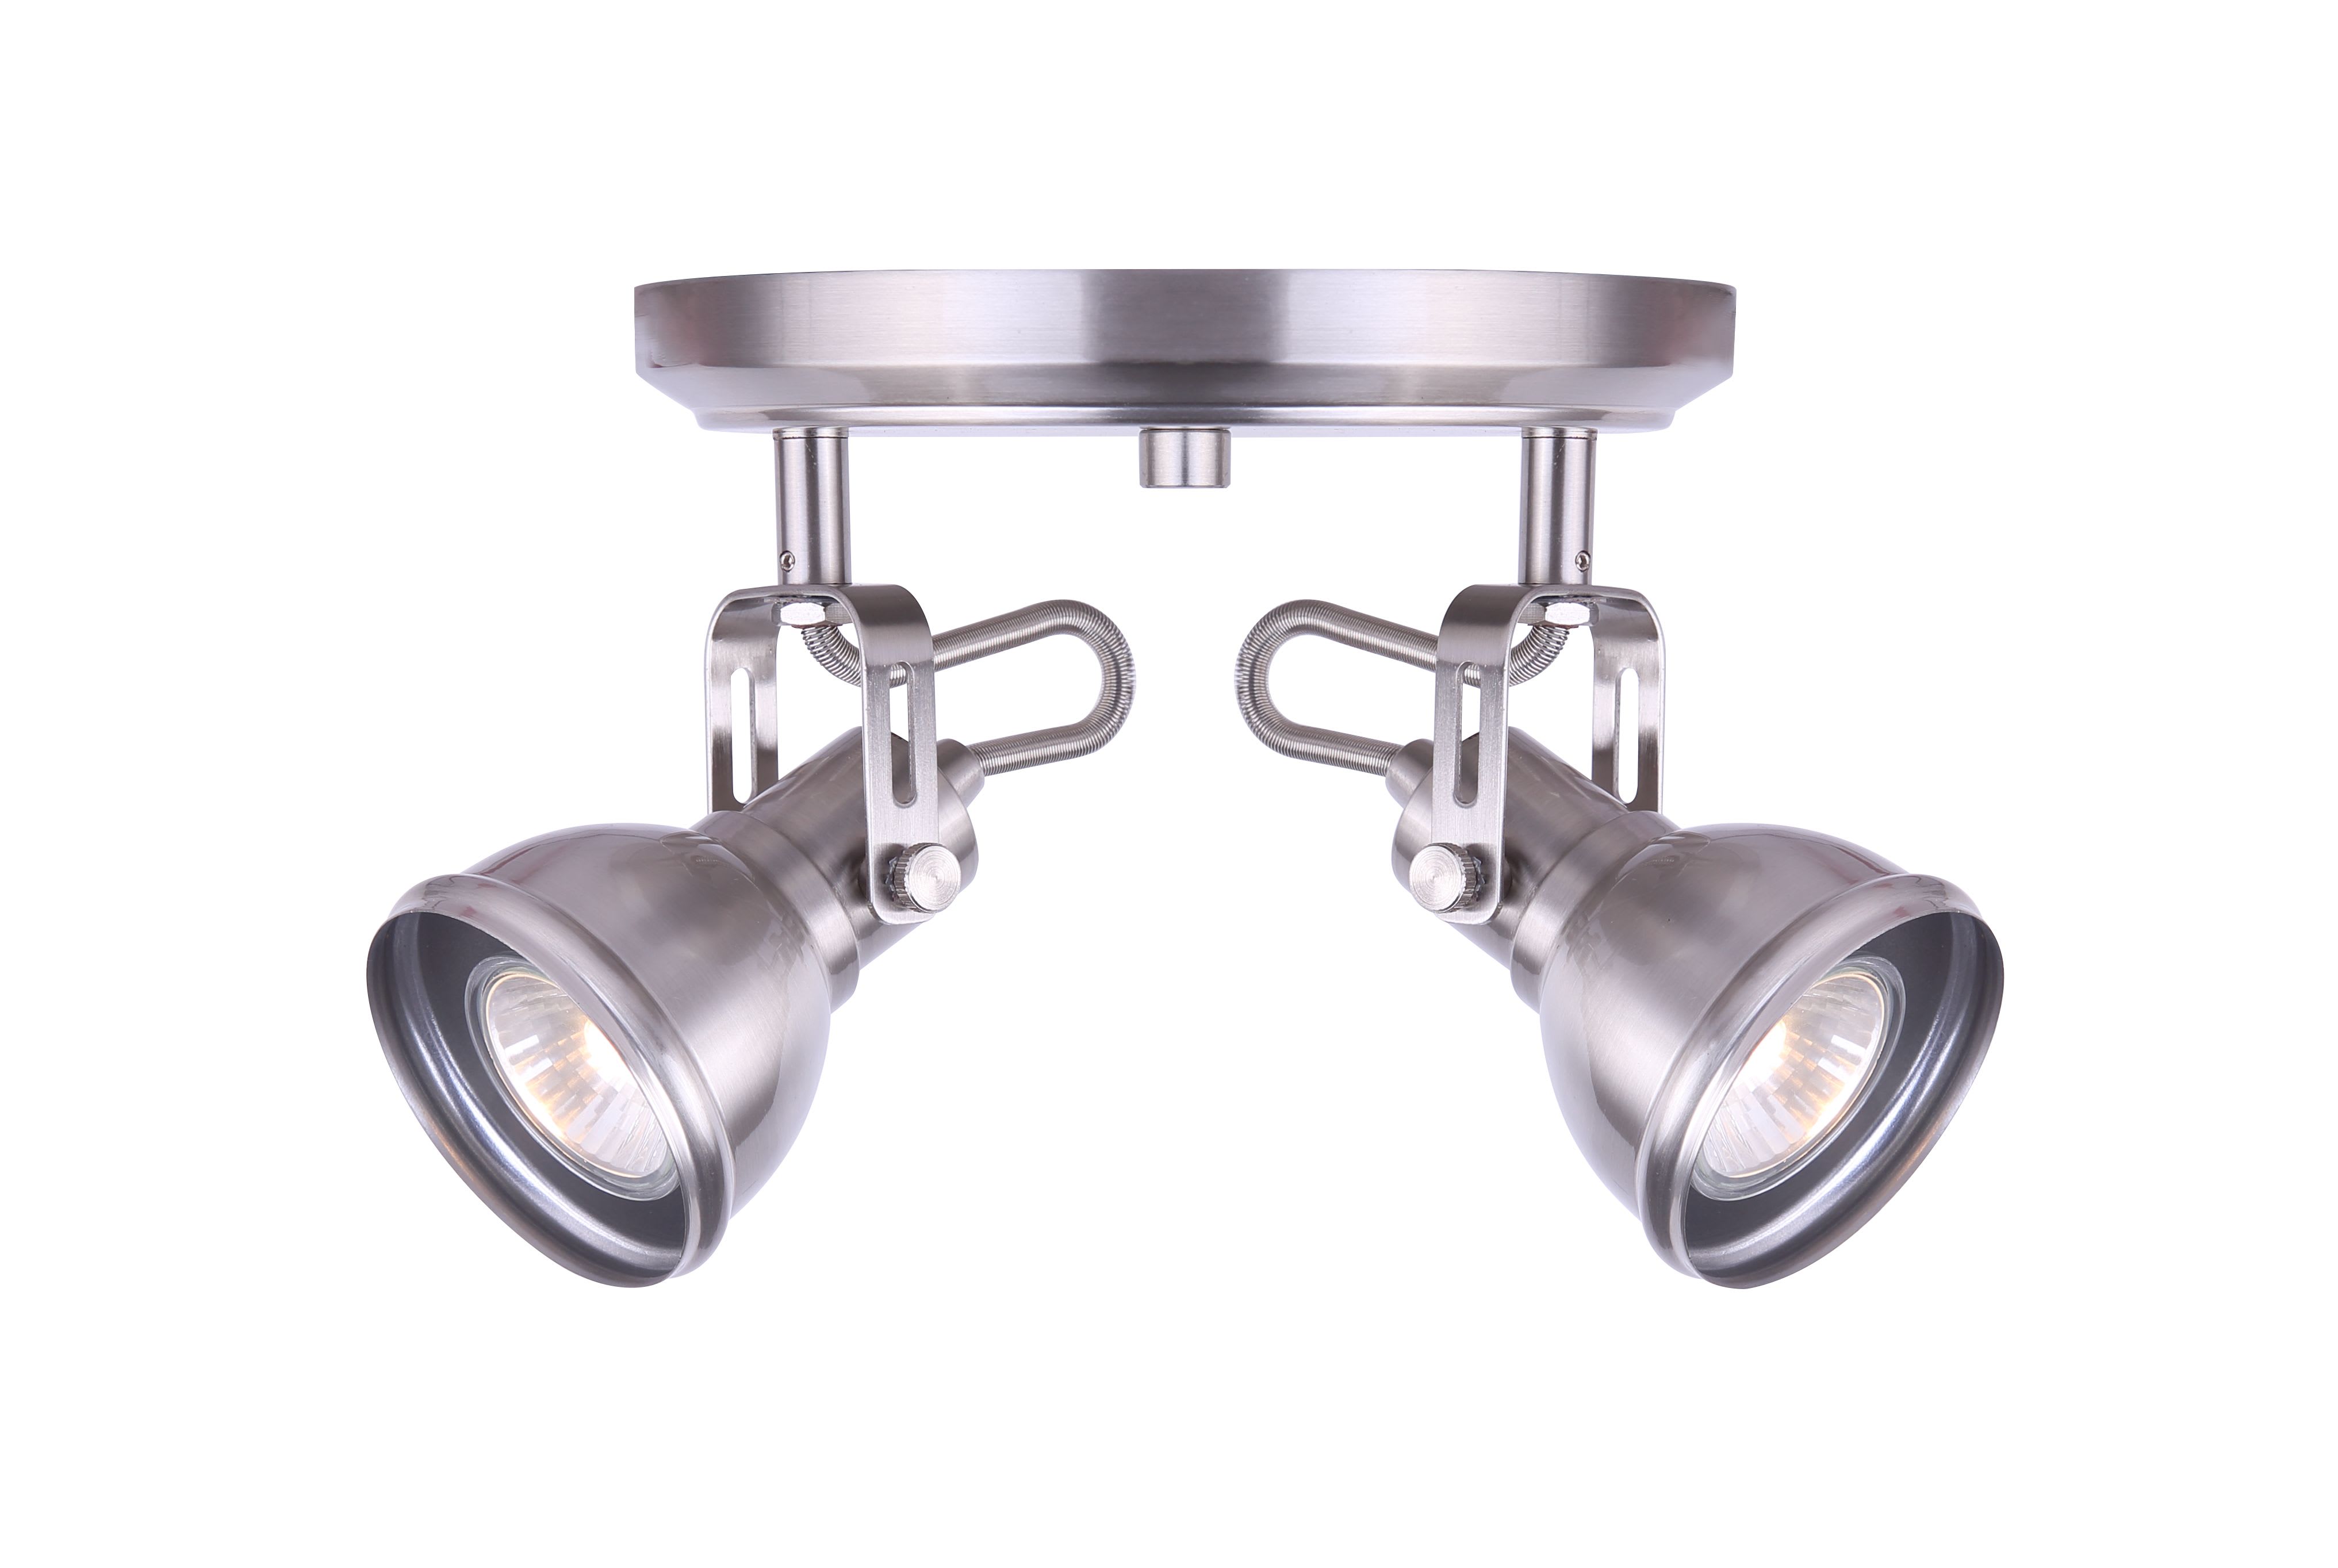 Brushed Nickel CANARM ICW622A02BN10 Ltd Polo 2 Light Ceiling//Wall Adjustable Heads